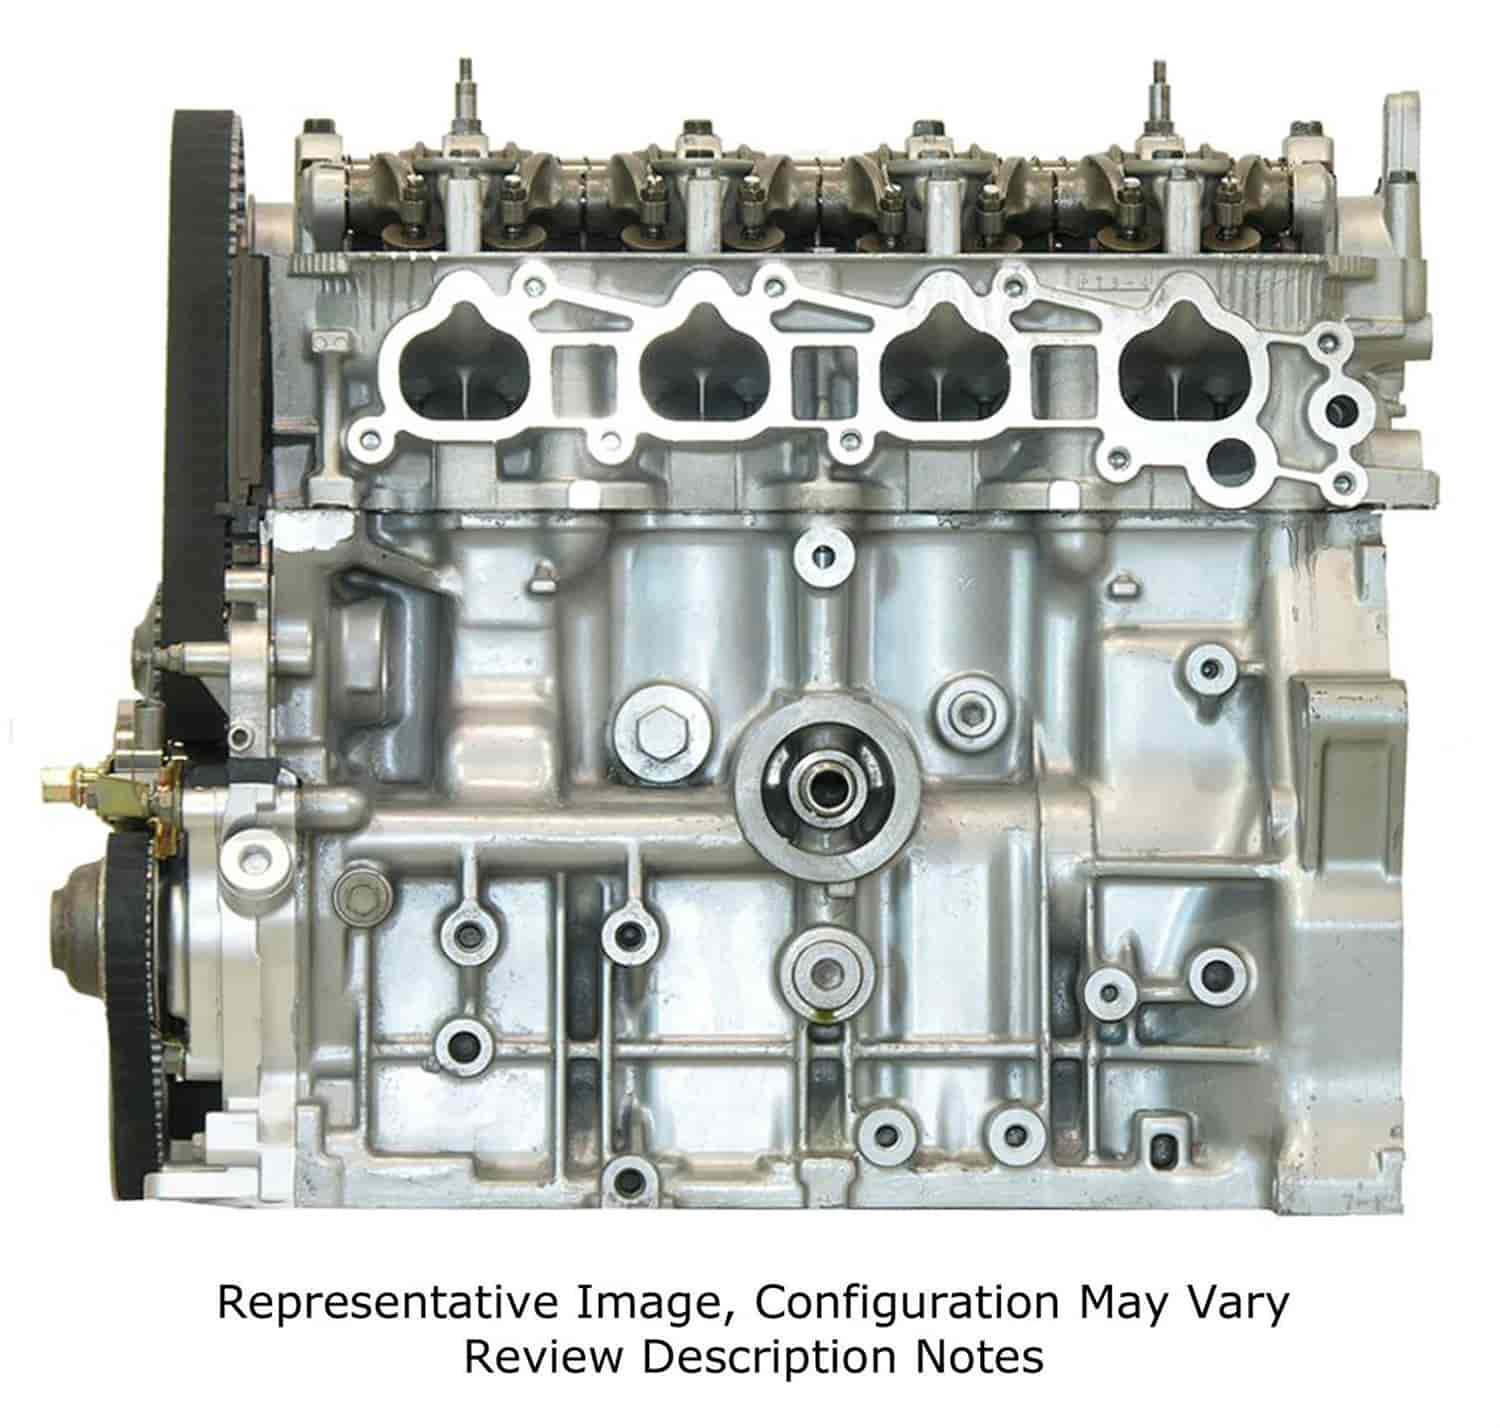 Remanufactured Crate Engine for 1996 Honda Prelude with 2.2L L4 F22A1